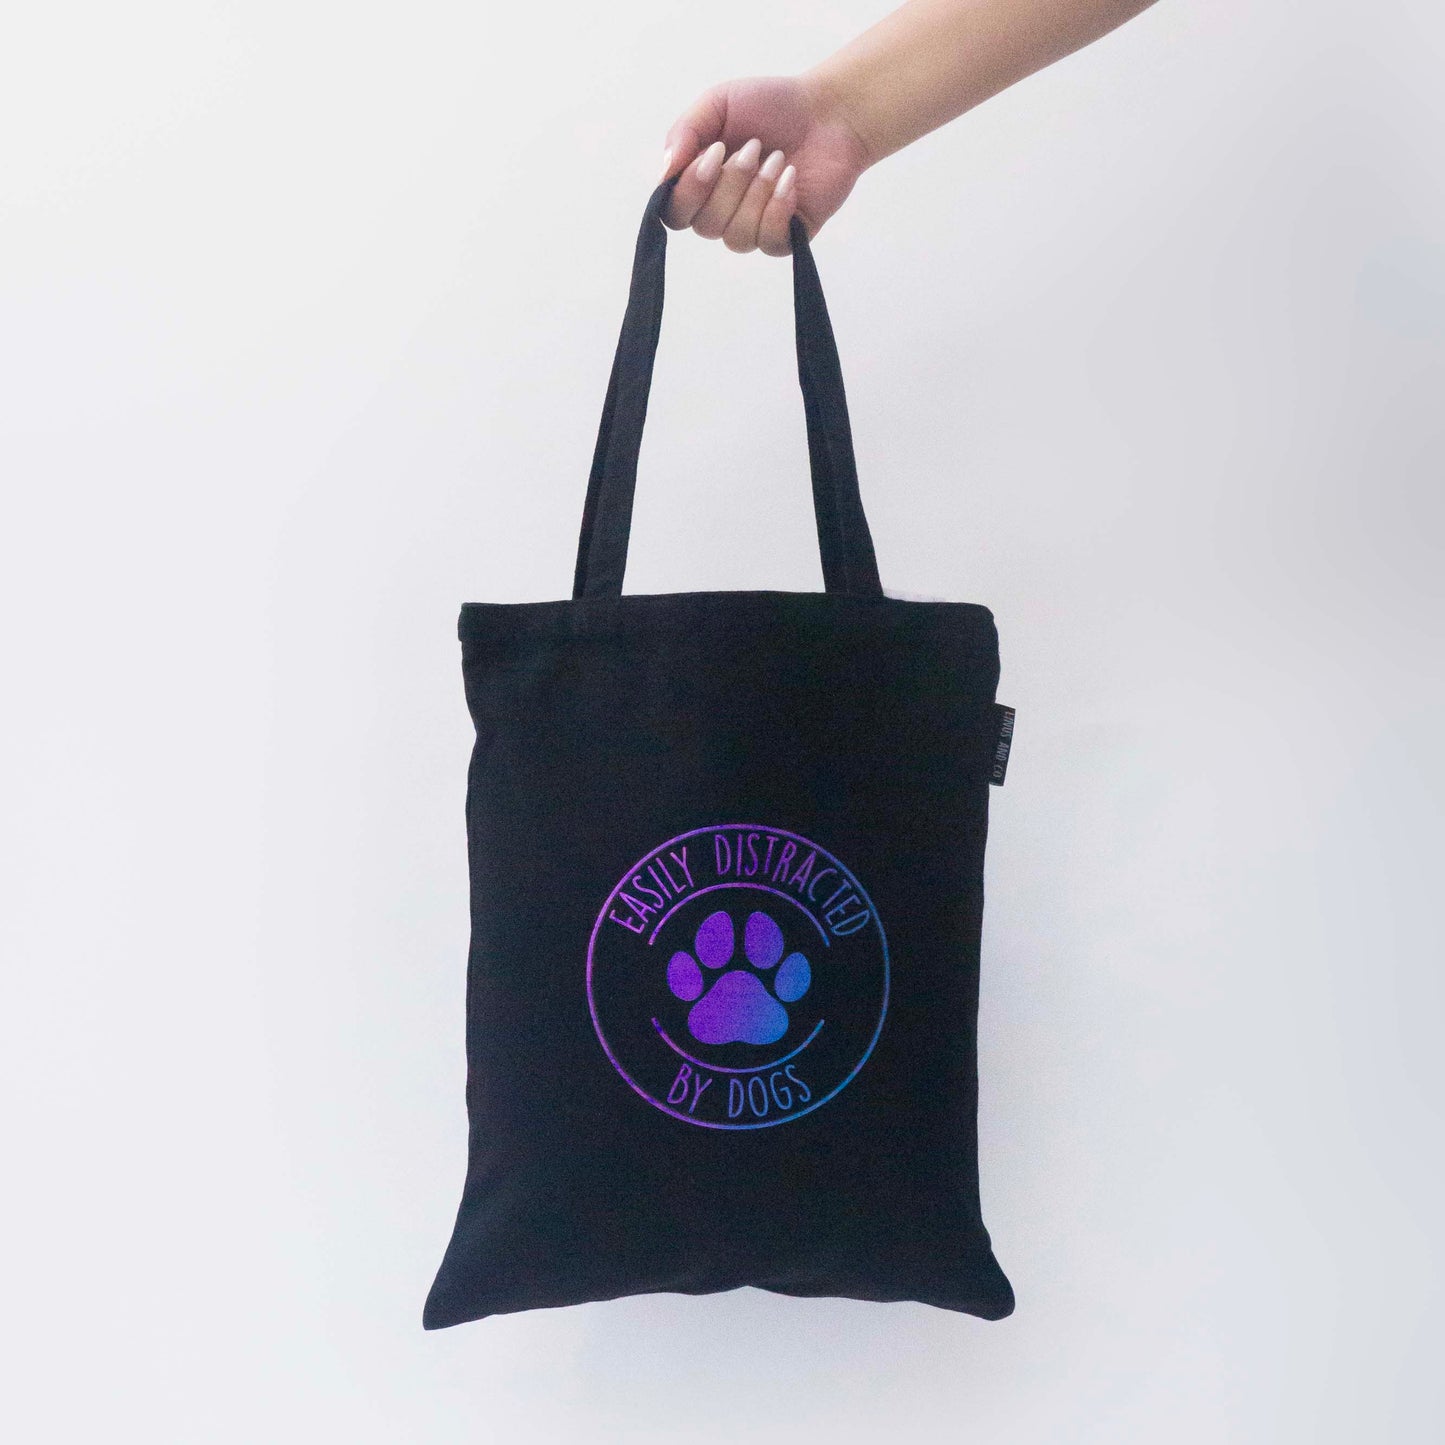 "Easily Distracted By Dogs" Black Tote Bag